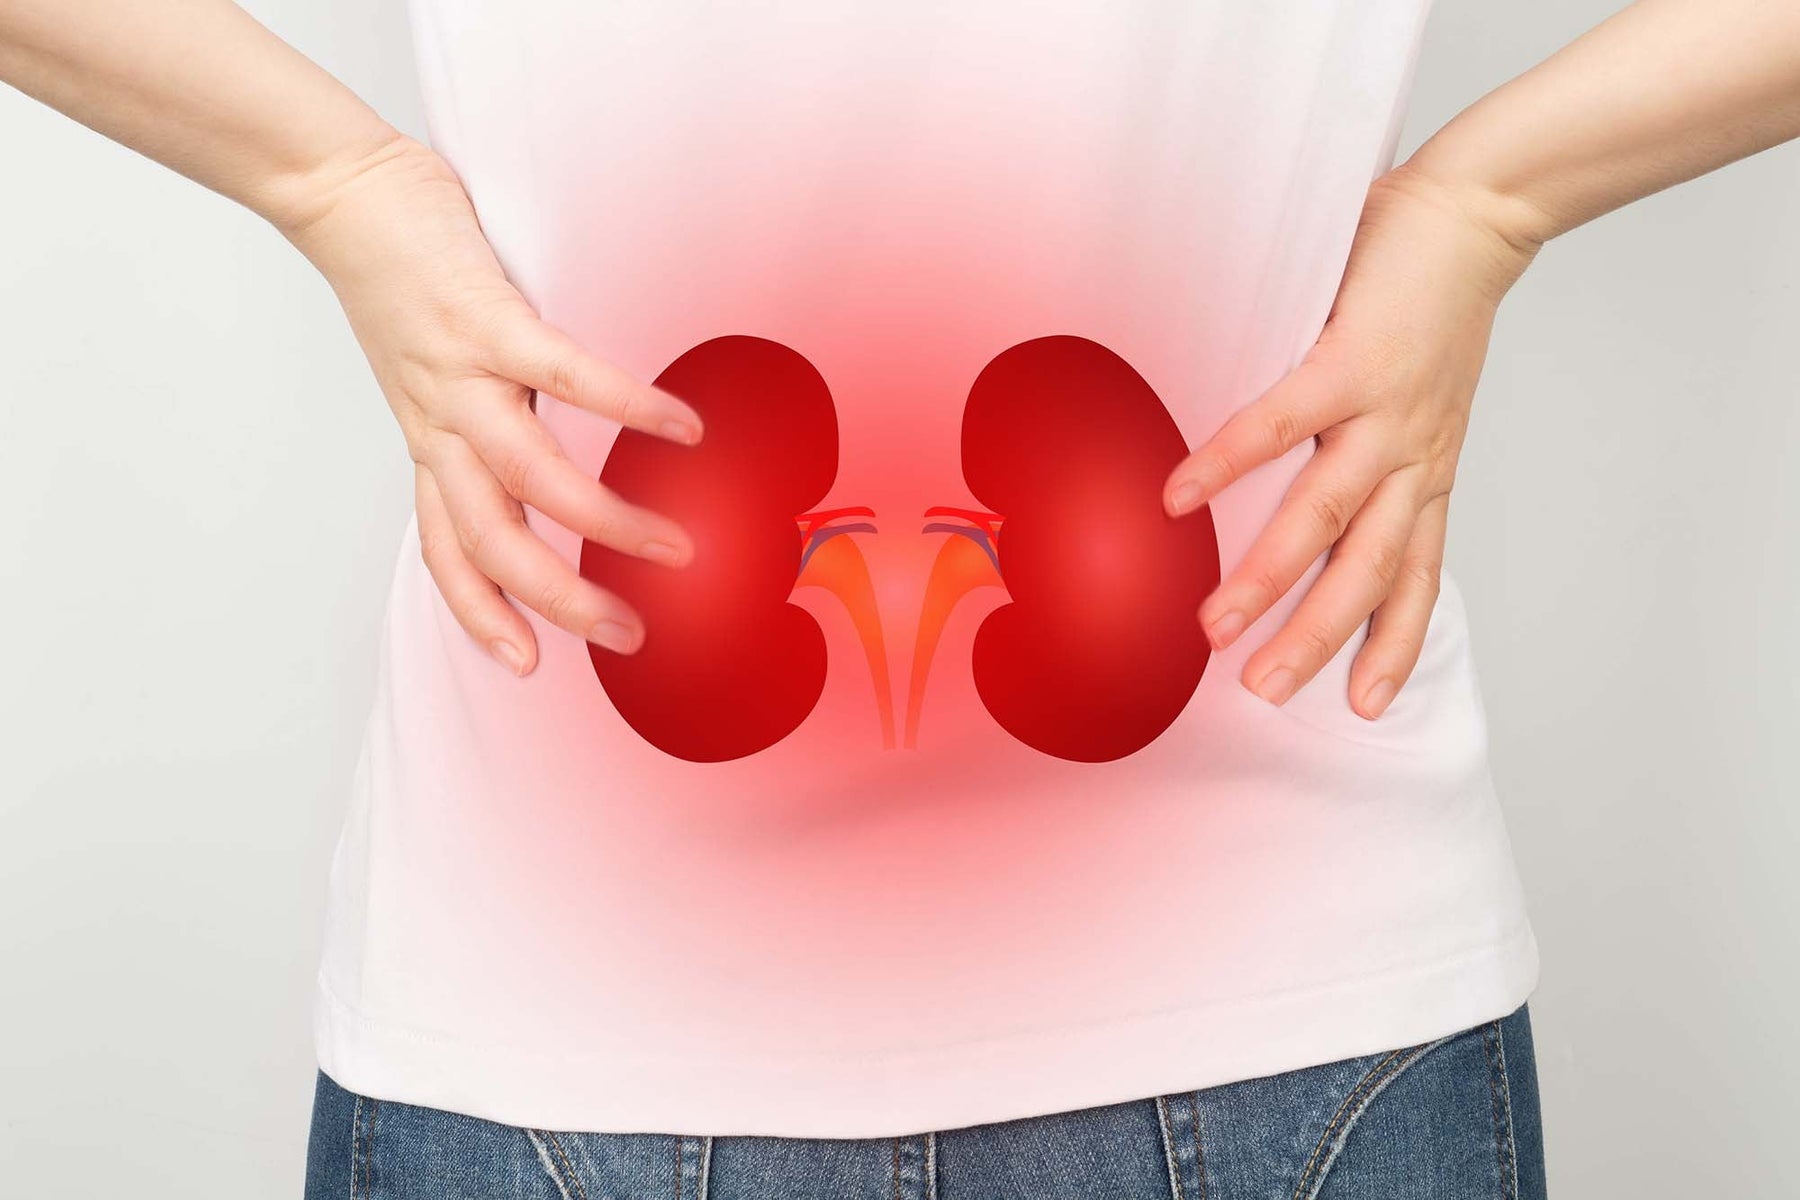 Chronic kidney disease image with location of kidneys